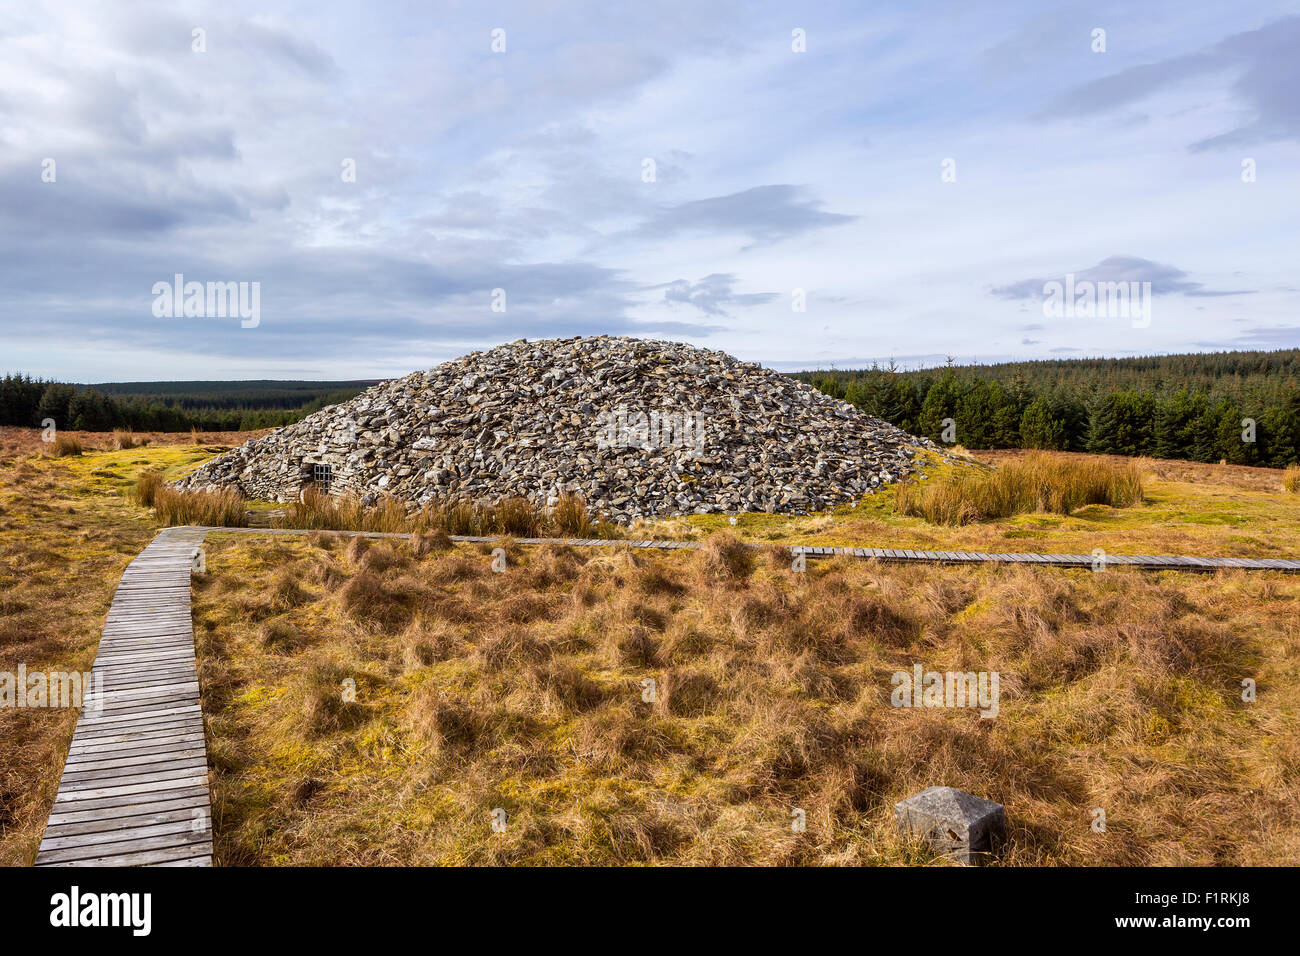 Camster Round, The Grey Cairns of Camster, Neolithic chambered cairns, Caithness, Highland, Scotland, United Kingdom, Europe. Stock Photo